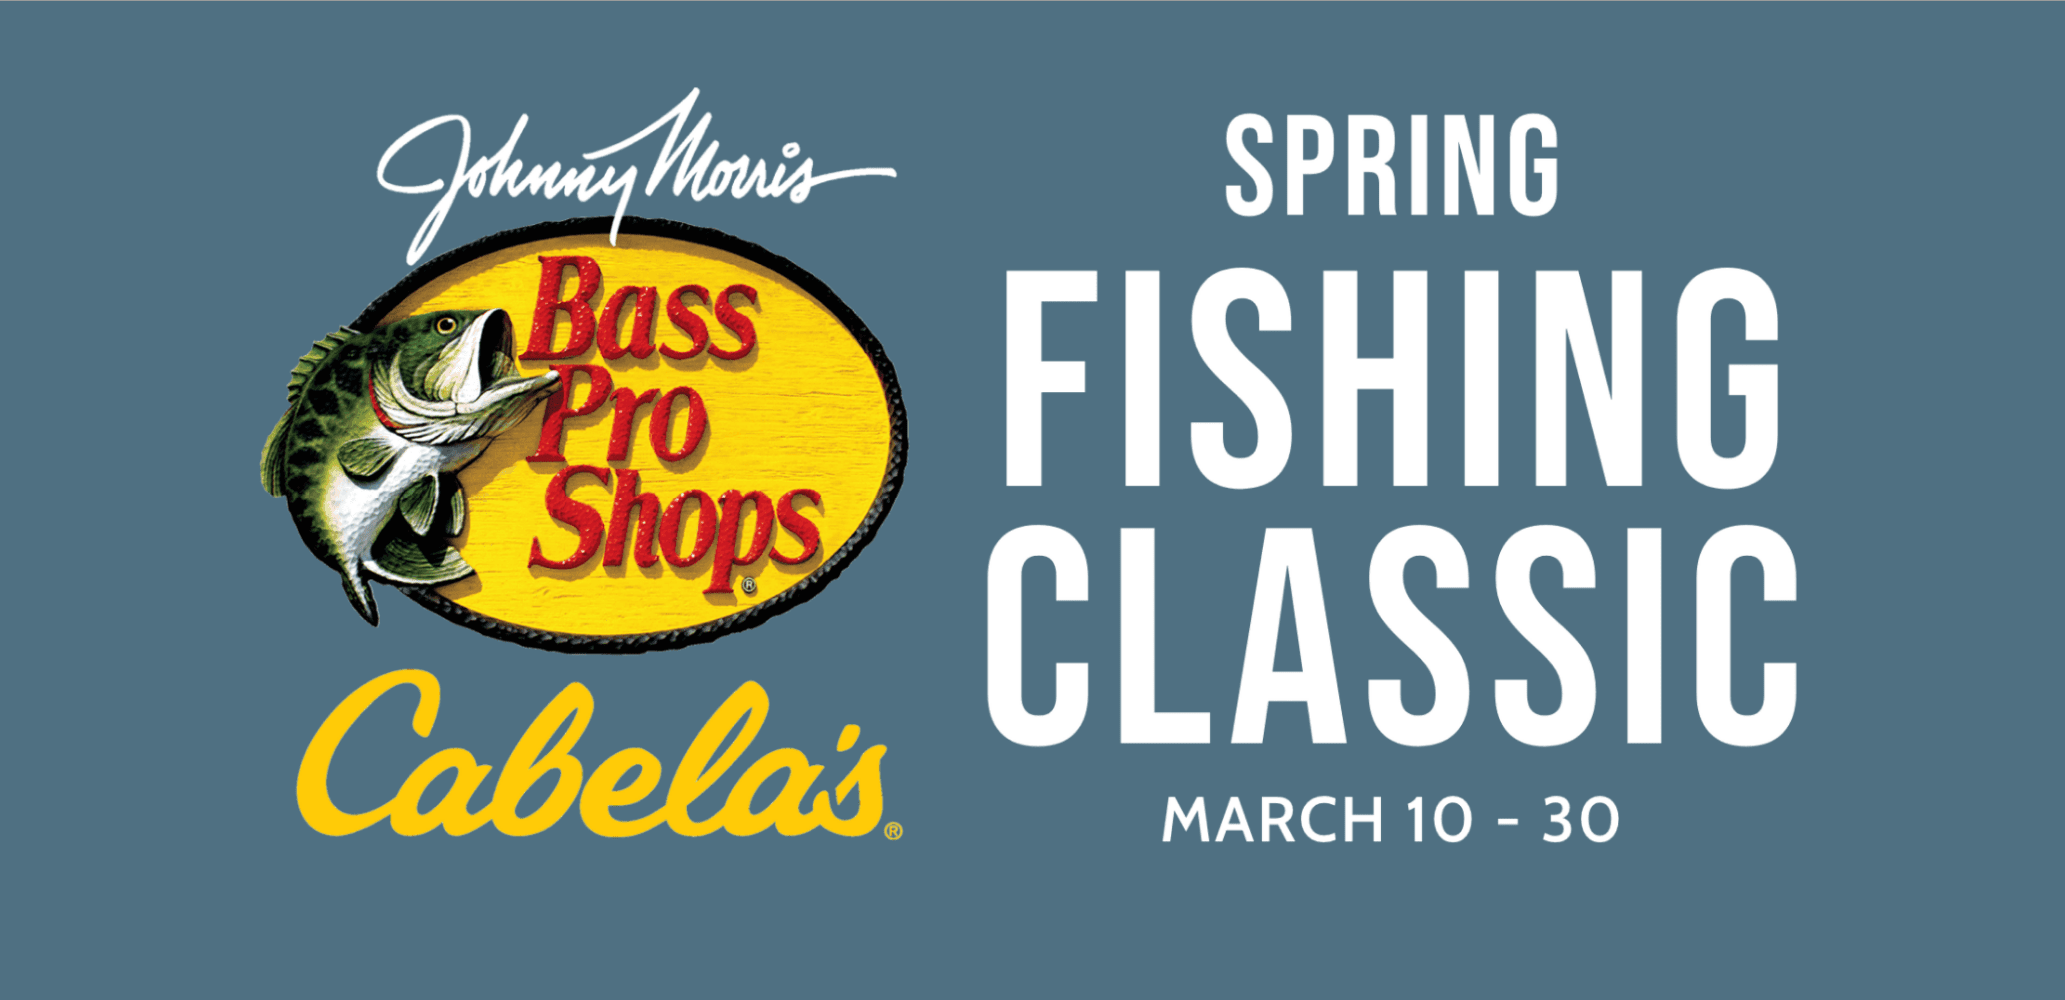 Bass Pro Shops and Cabela's Spring Fishing Classic Packed With